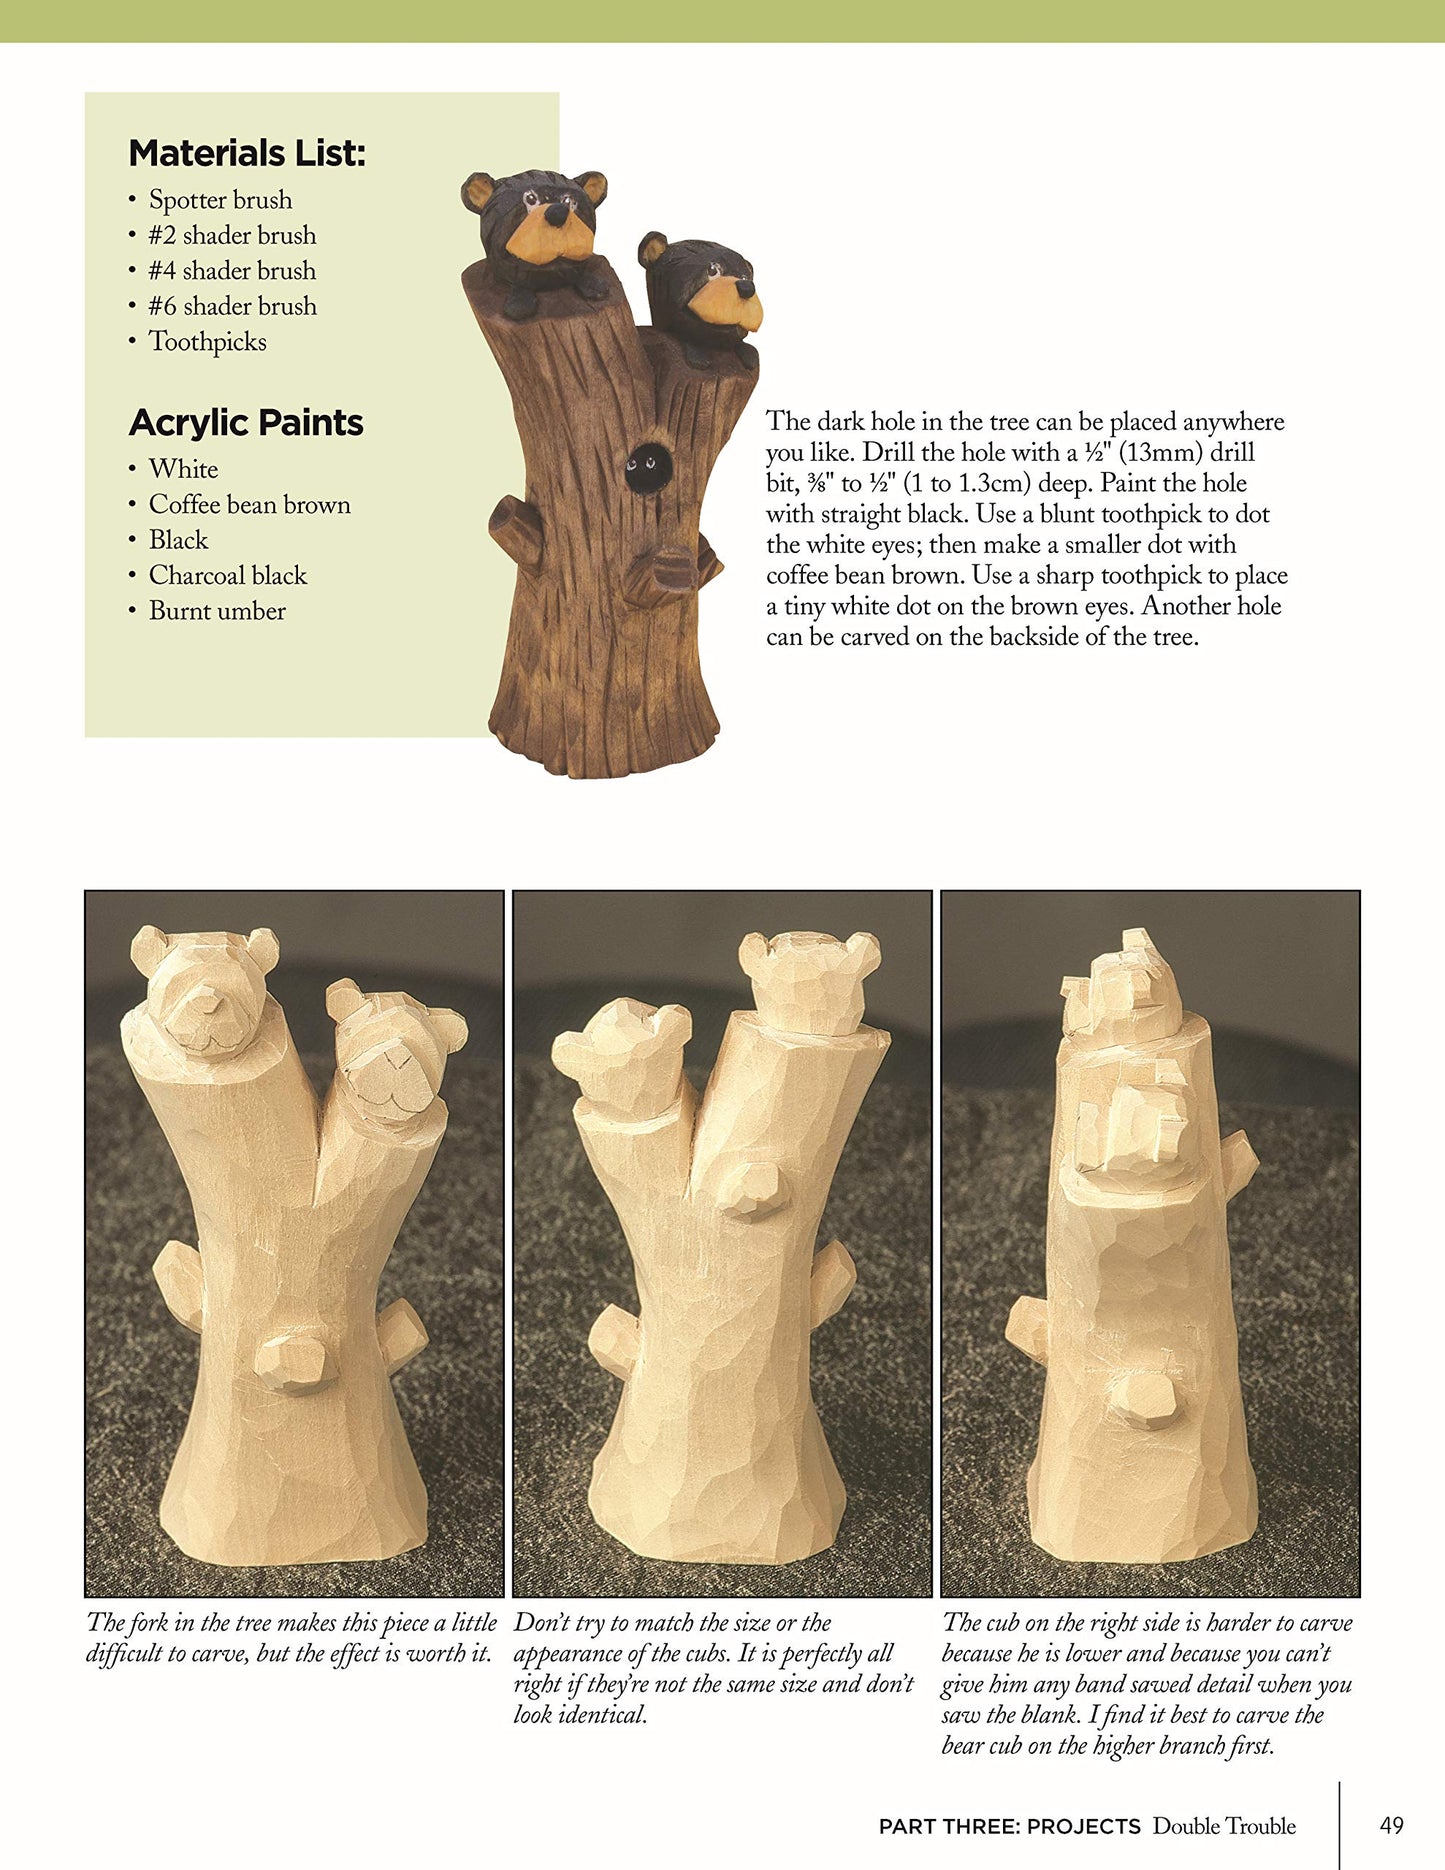 Whittling the Country Bear & His Friends: 12 Simple Projects for Beginners (Fox Chapel Publishing) Step-by-Step Instructions & Easy-to-Use Patterns